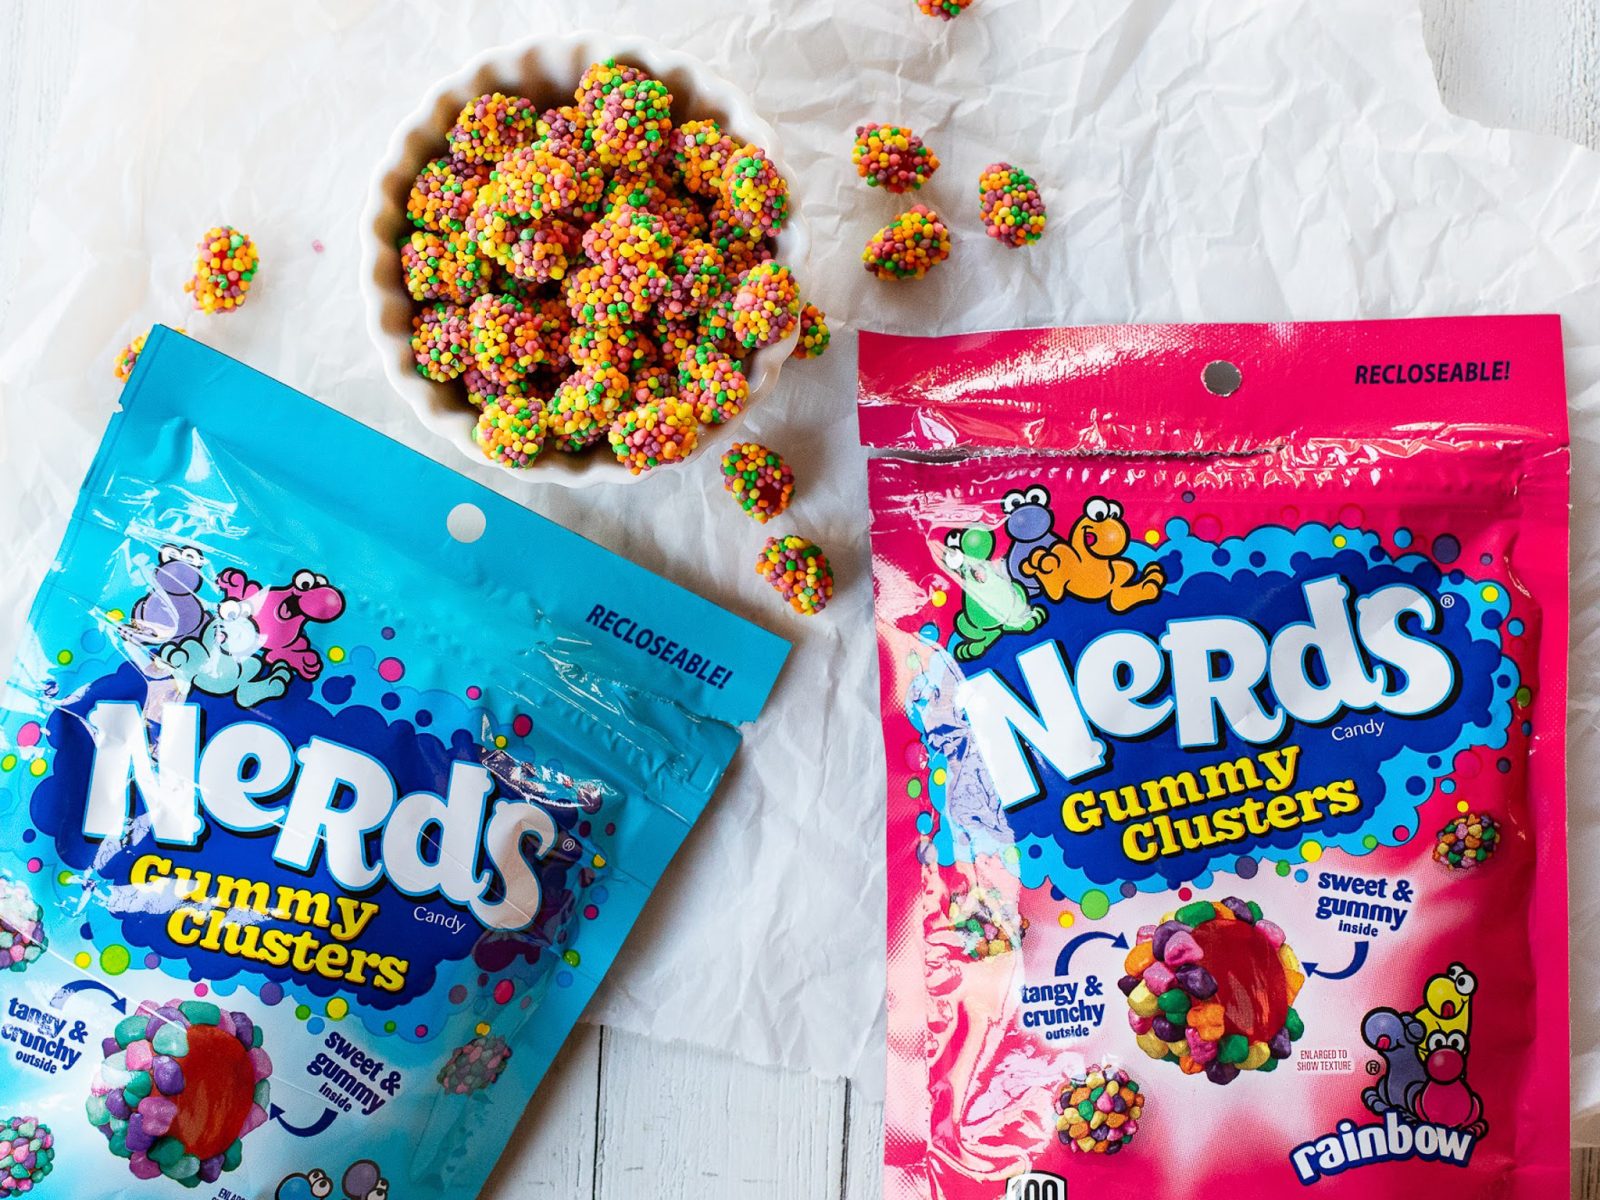 Nerds Gummy Cluster Family Size Bags As Low As $4.99 At Kroger (Regular Price $8.49)